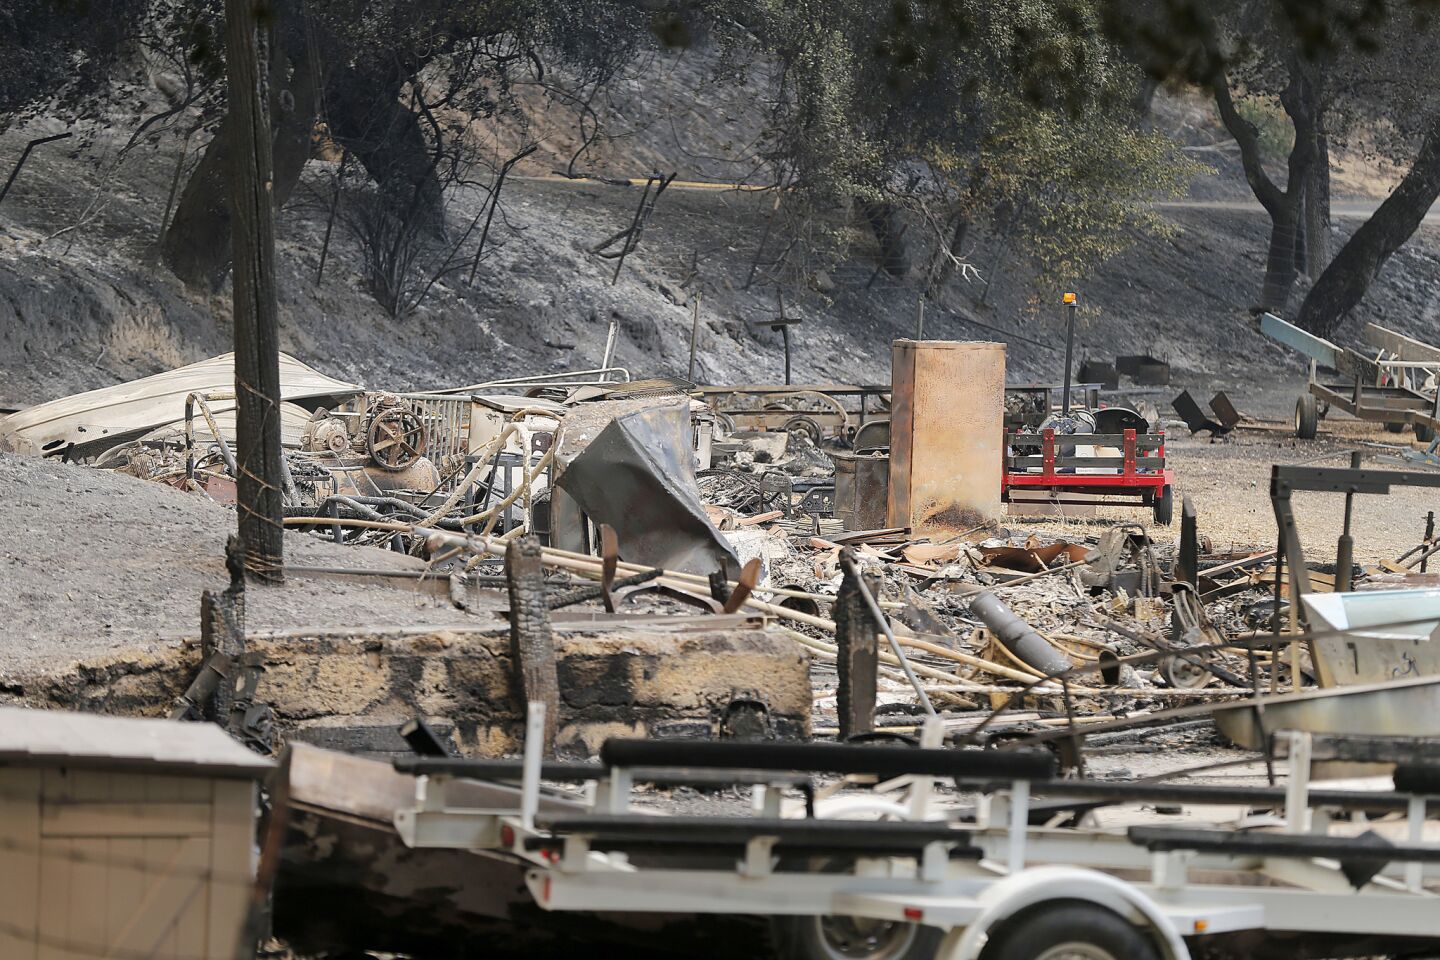 The remains of a structure and boats scorched by the Whittier fire sit along State Route 154 in the Los Padres National Forest near Lake Cachuma in Santa Barbara County.